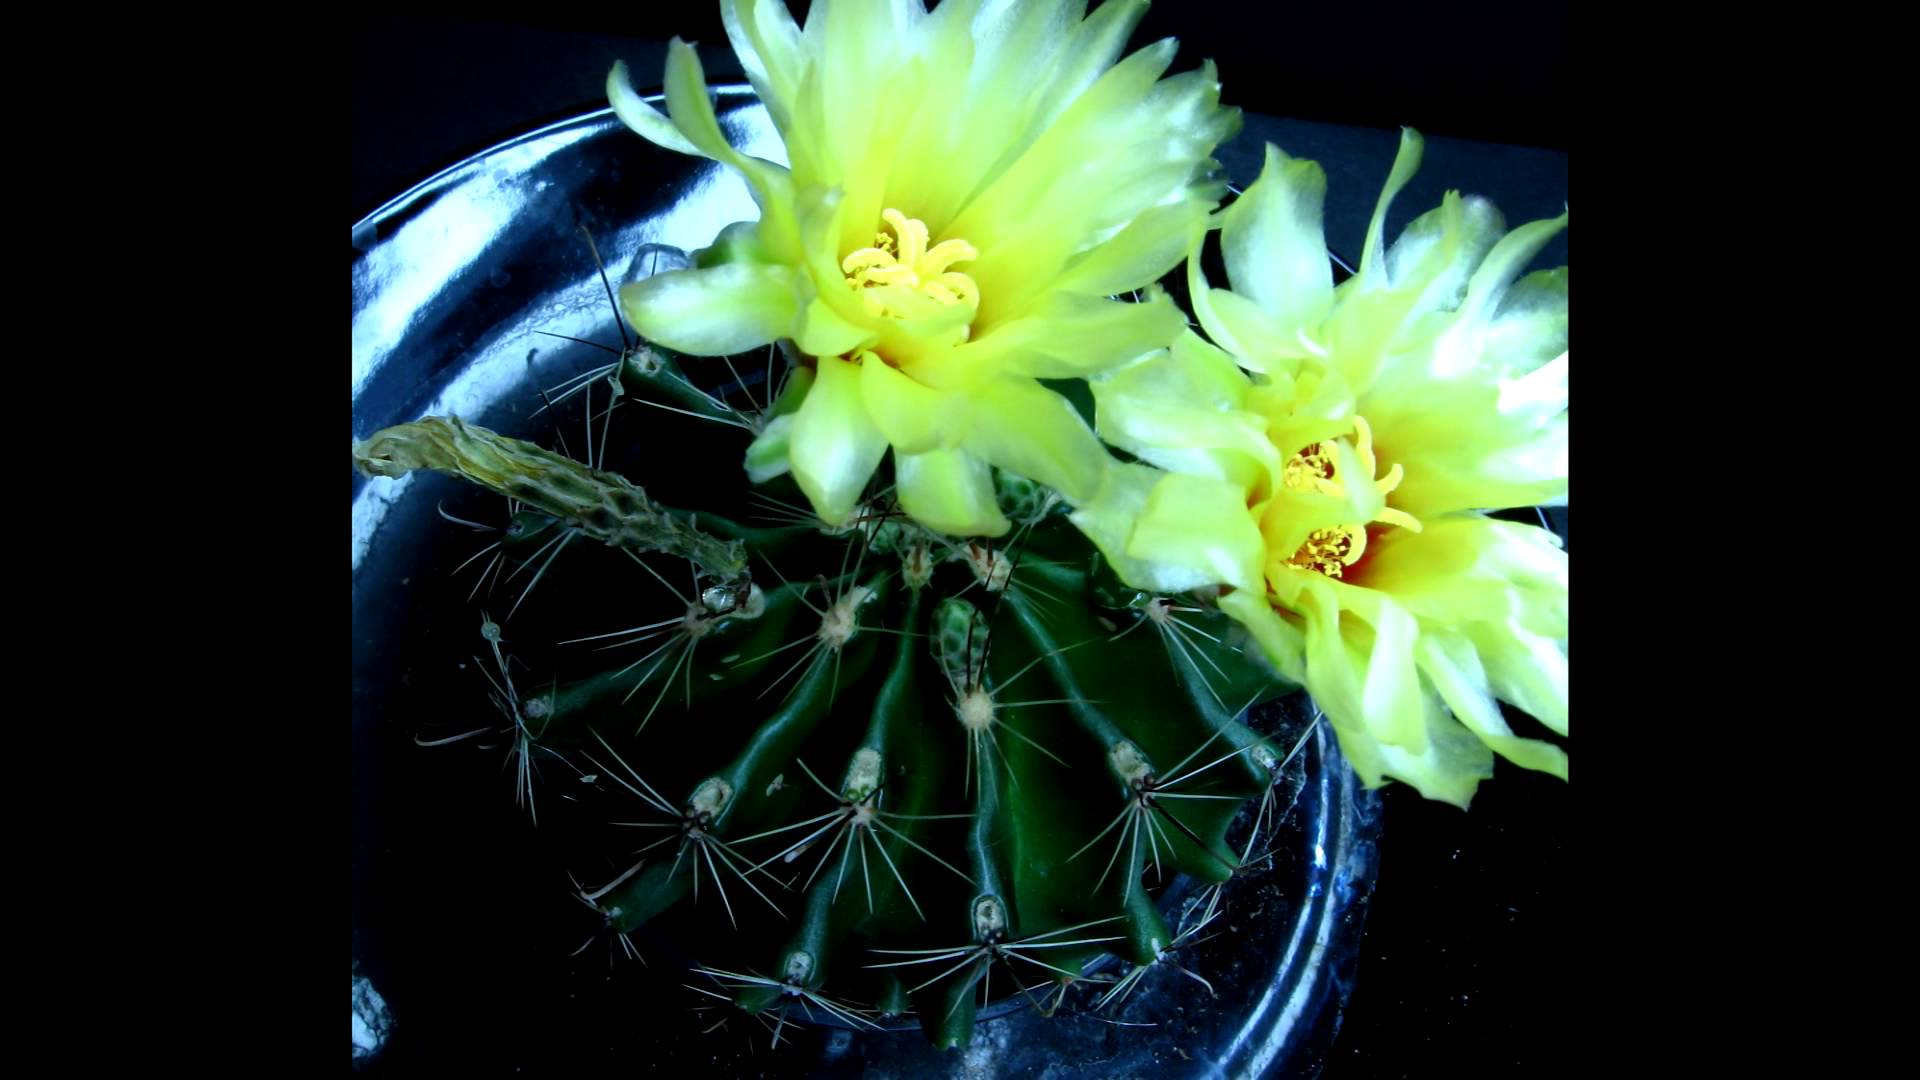 Time Lapse of Cactus Flower Blooming - YouTube